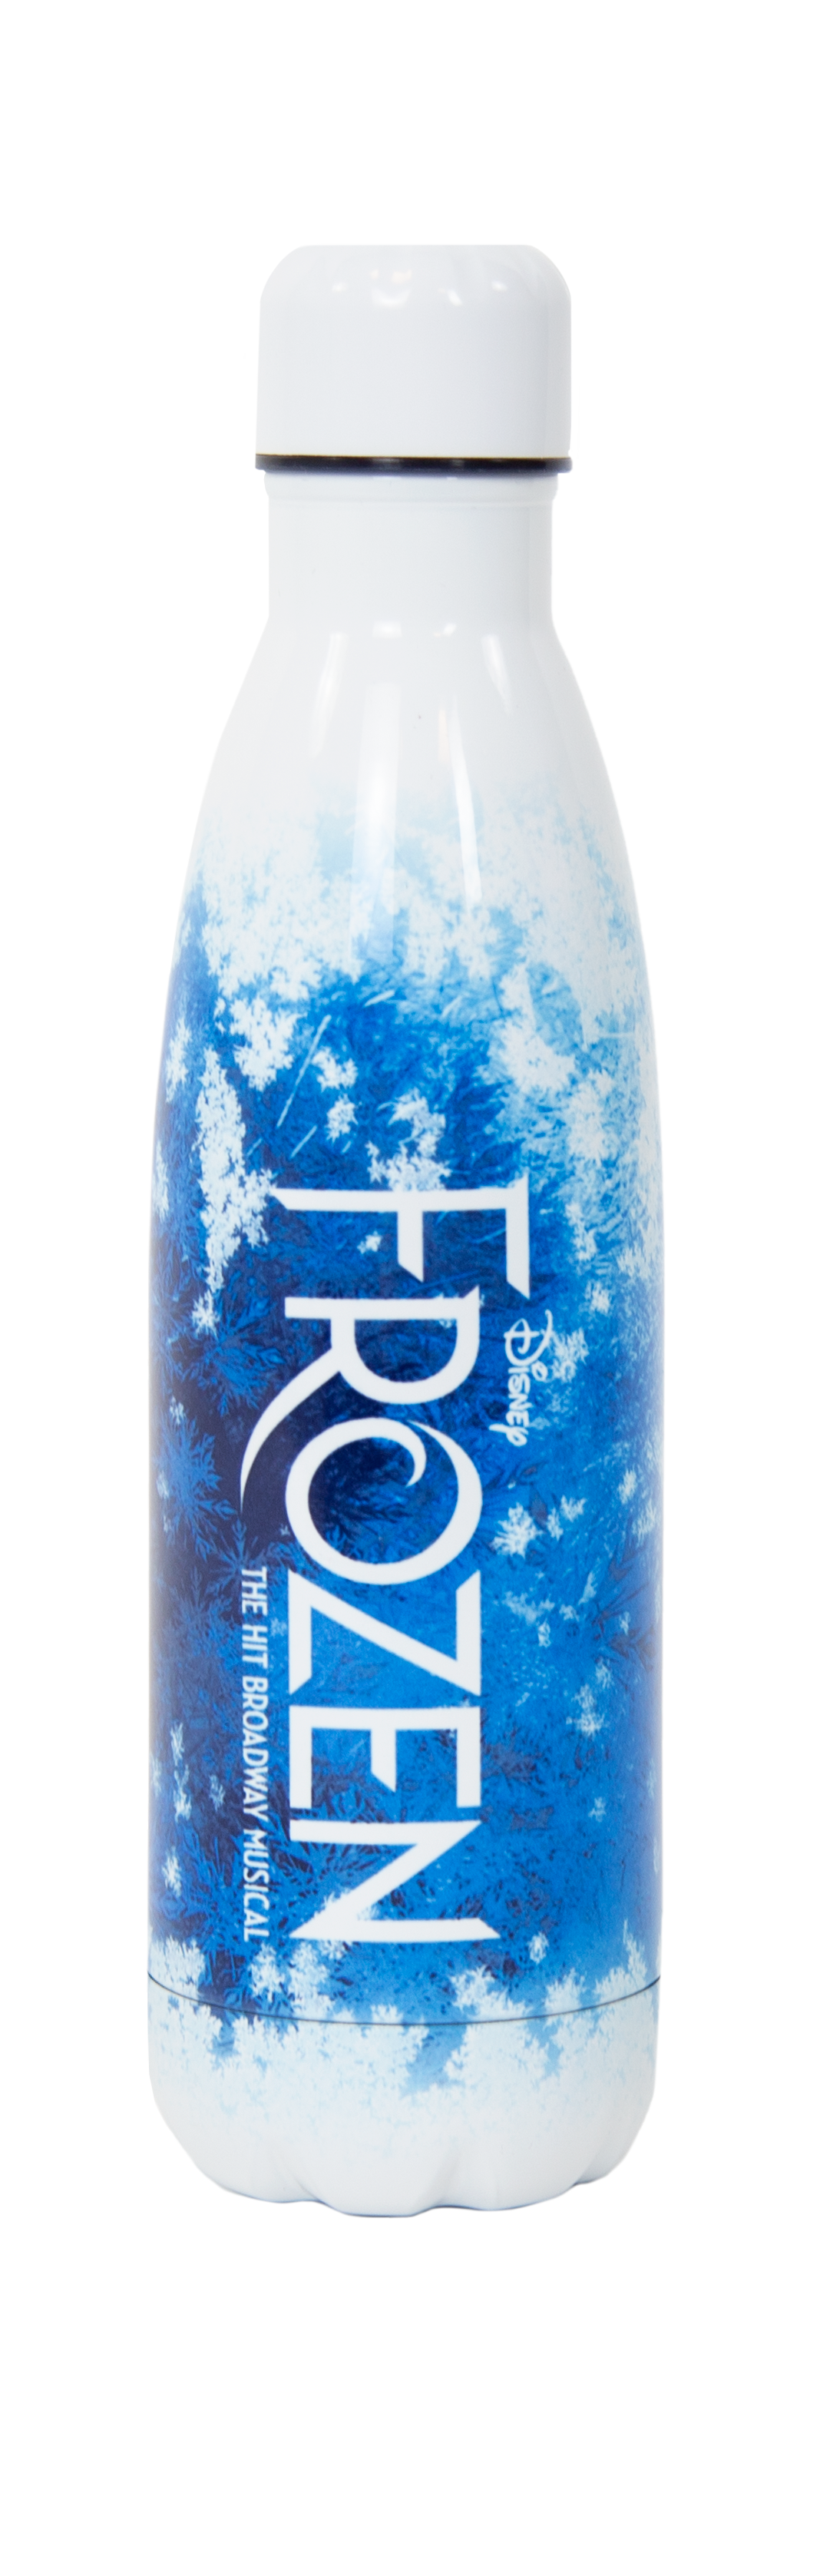 http://www.playbillstore.com/shared/images/product/4614-FZ-LOGO-WATER-BOTTLE-RETOUCHED.png